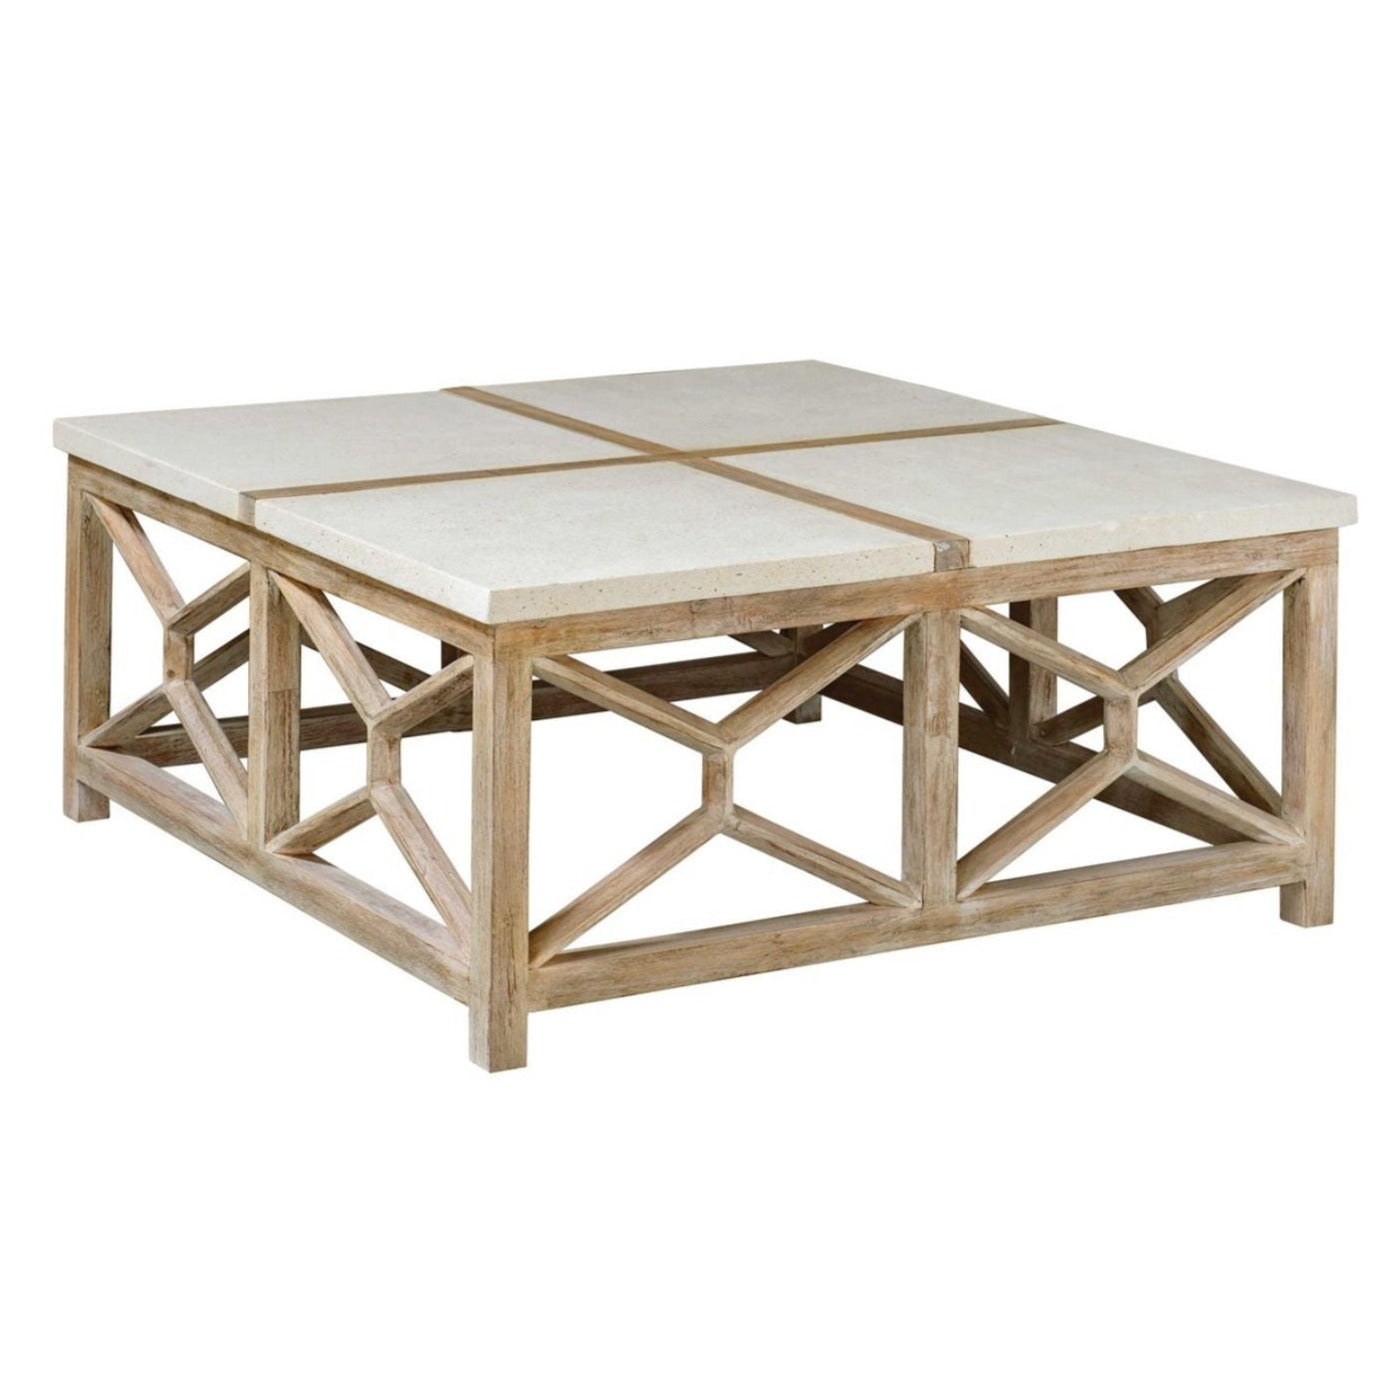 The square cocktail table is handcrafted from solid mixed woods with an natural ivory limestone top, on a geometric base finished in a warm oatmeal wash.